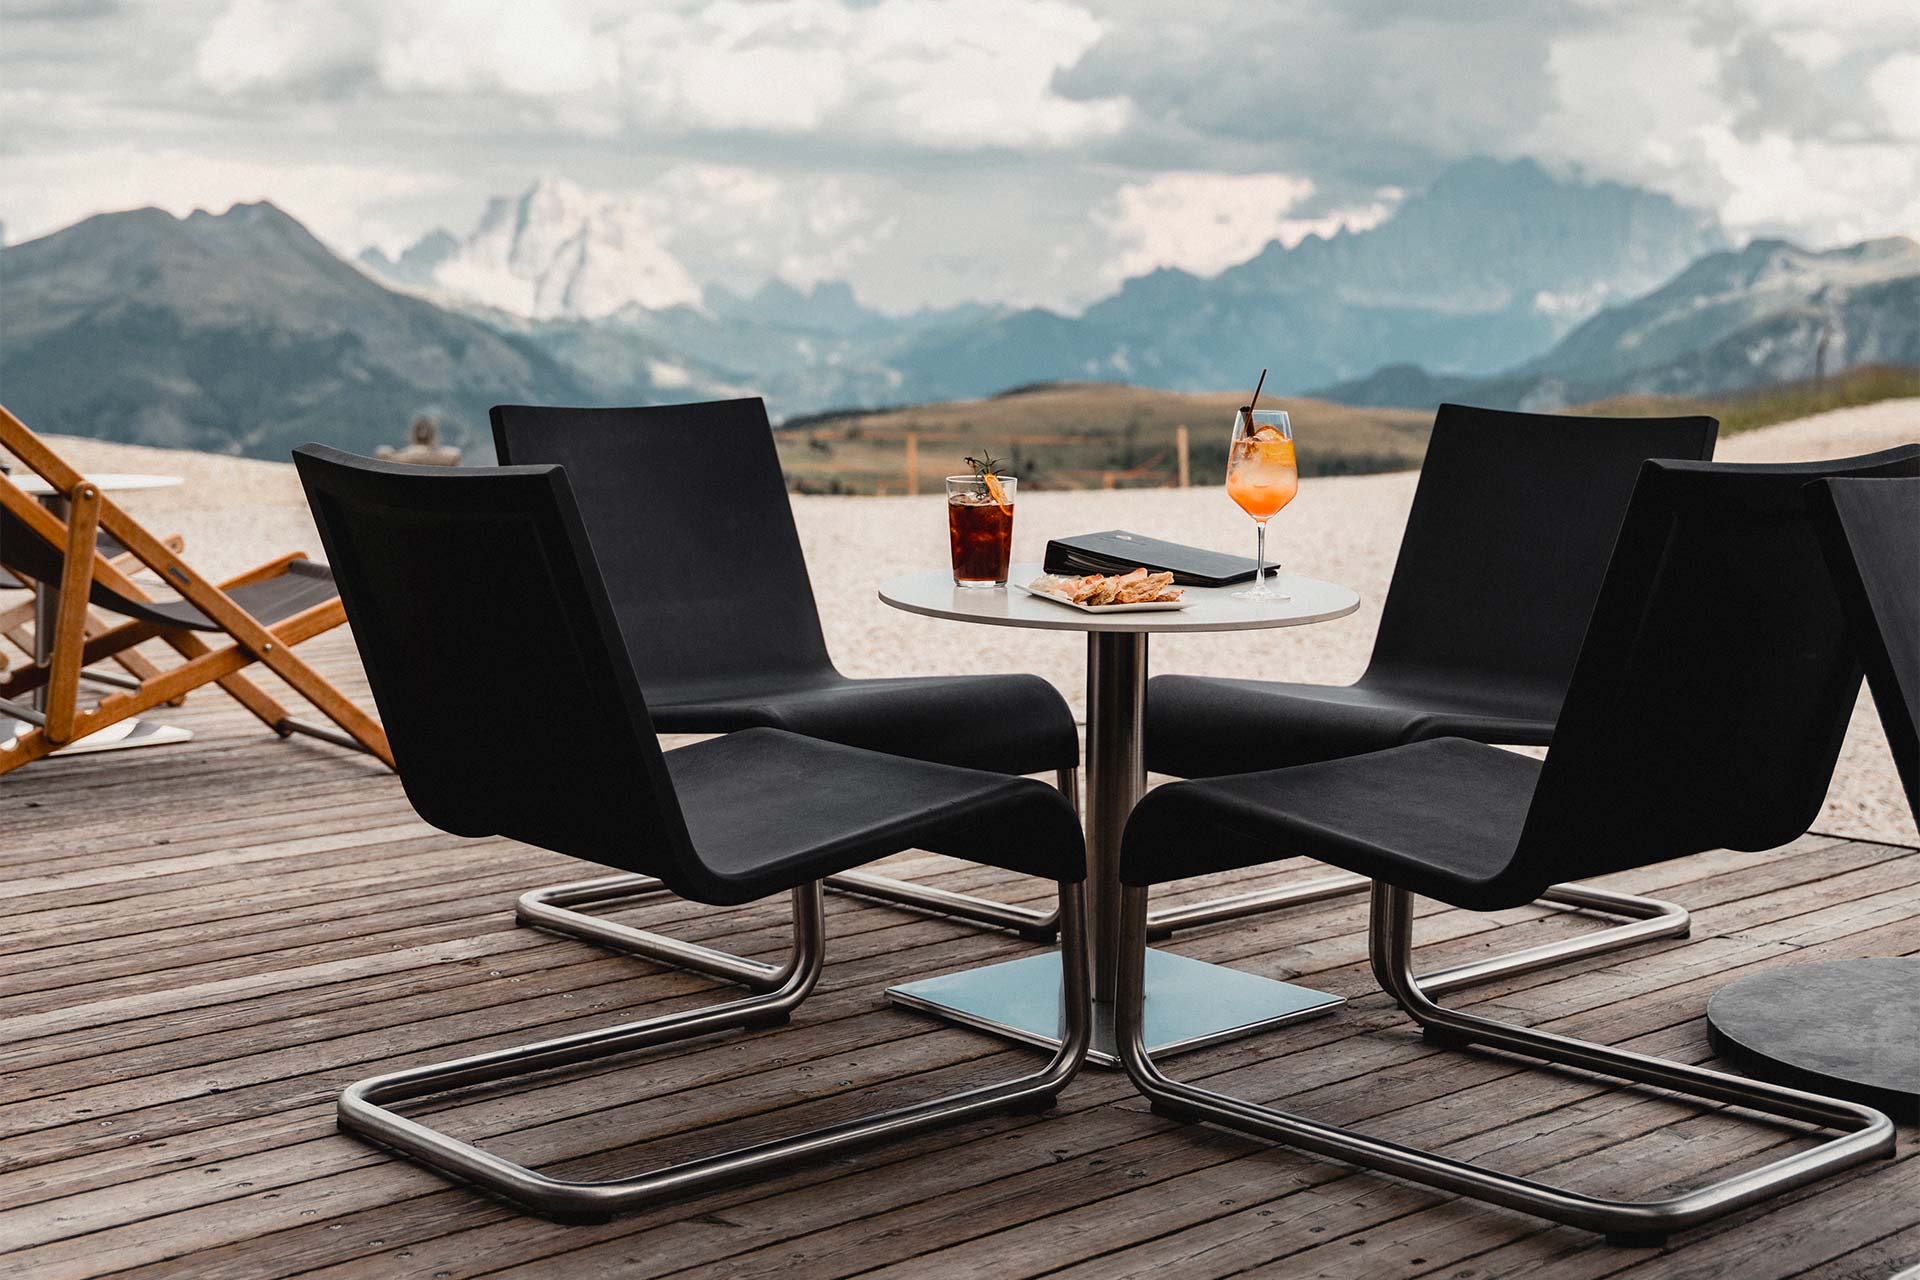 The Alpine Lounge is furnished with chairs, tables and sofas, from which guests can enjoy a panoramic view of Corvare. A stove in the middle warms the room.